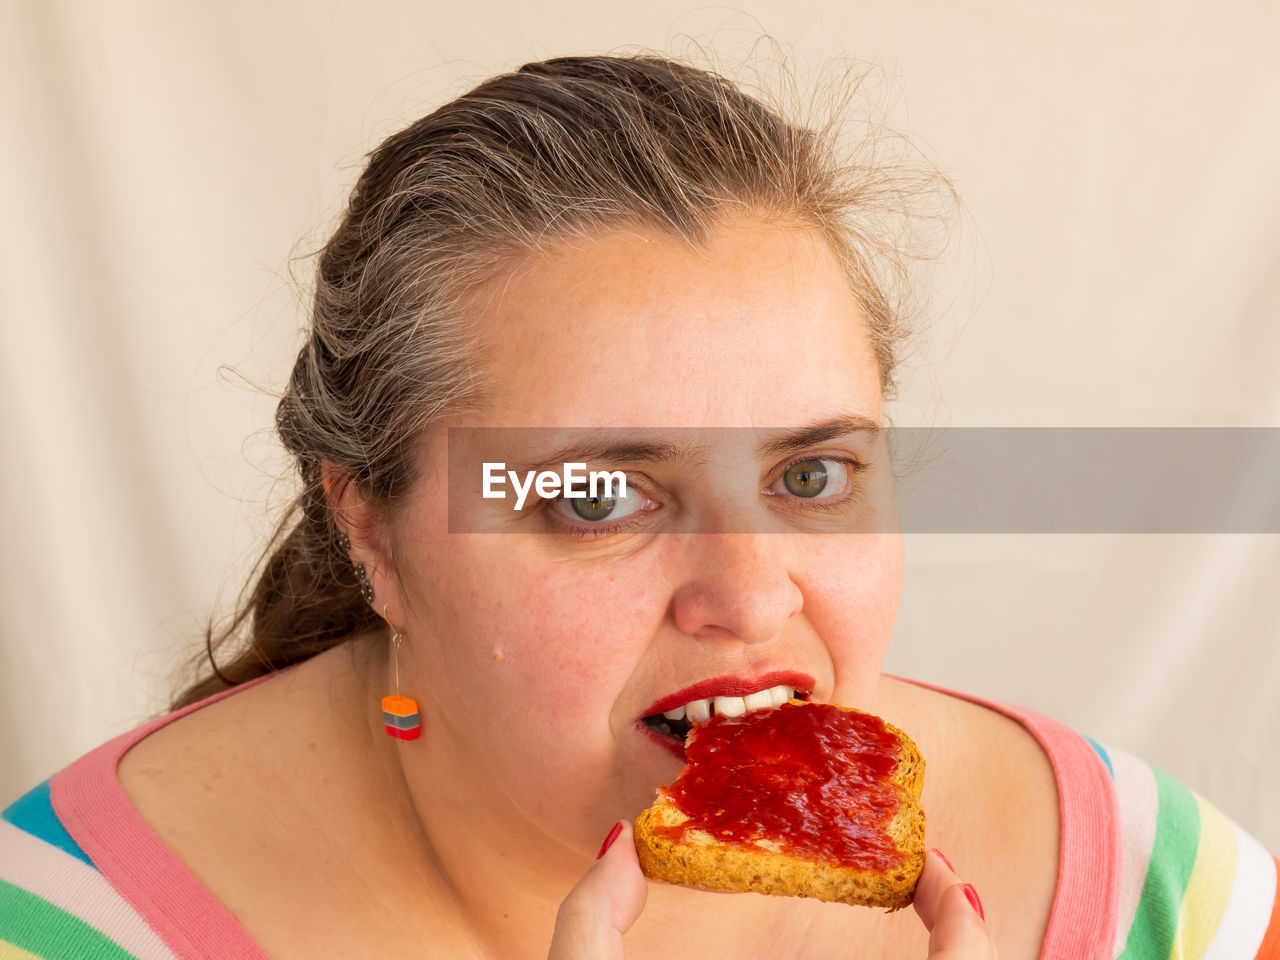 CLOSE-UP PORTRAIT OF A WOMAN EATING FOOD